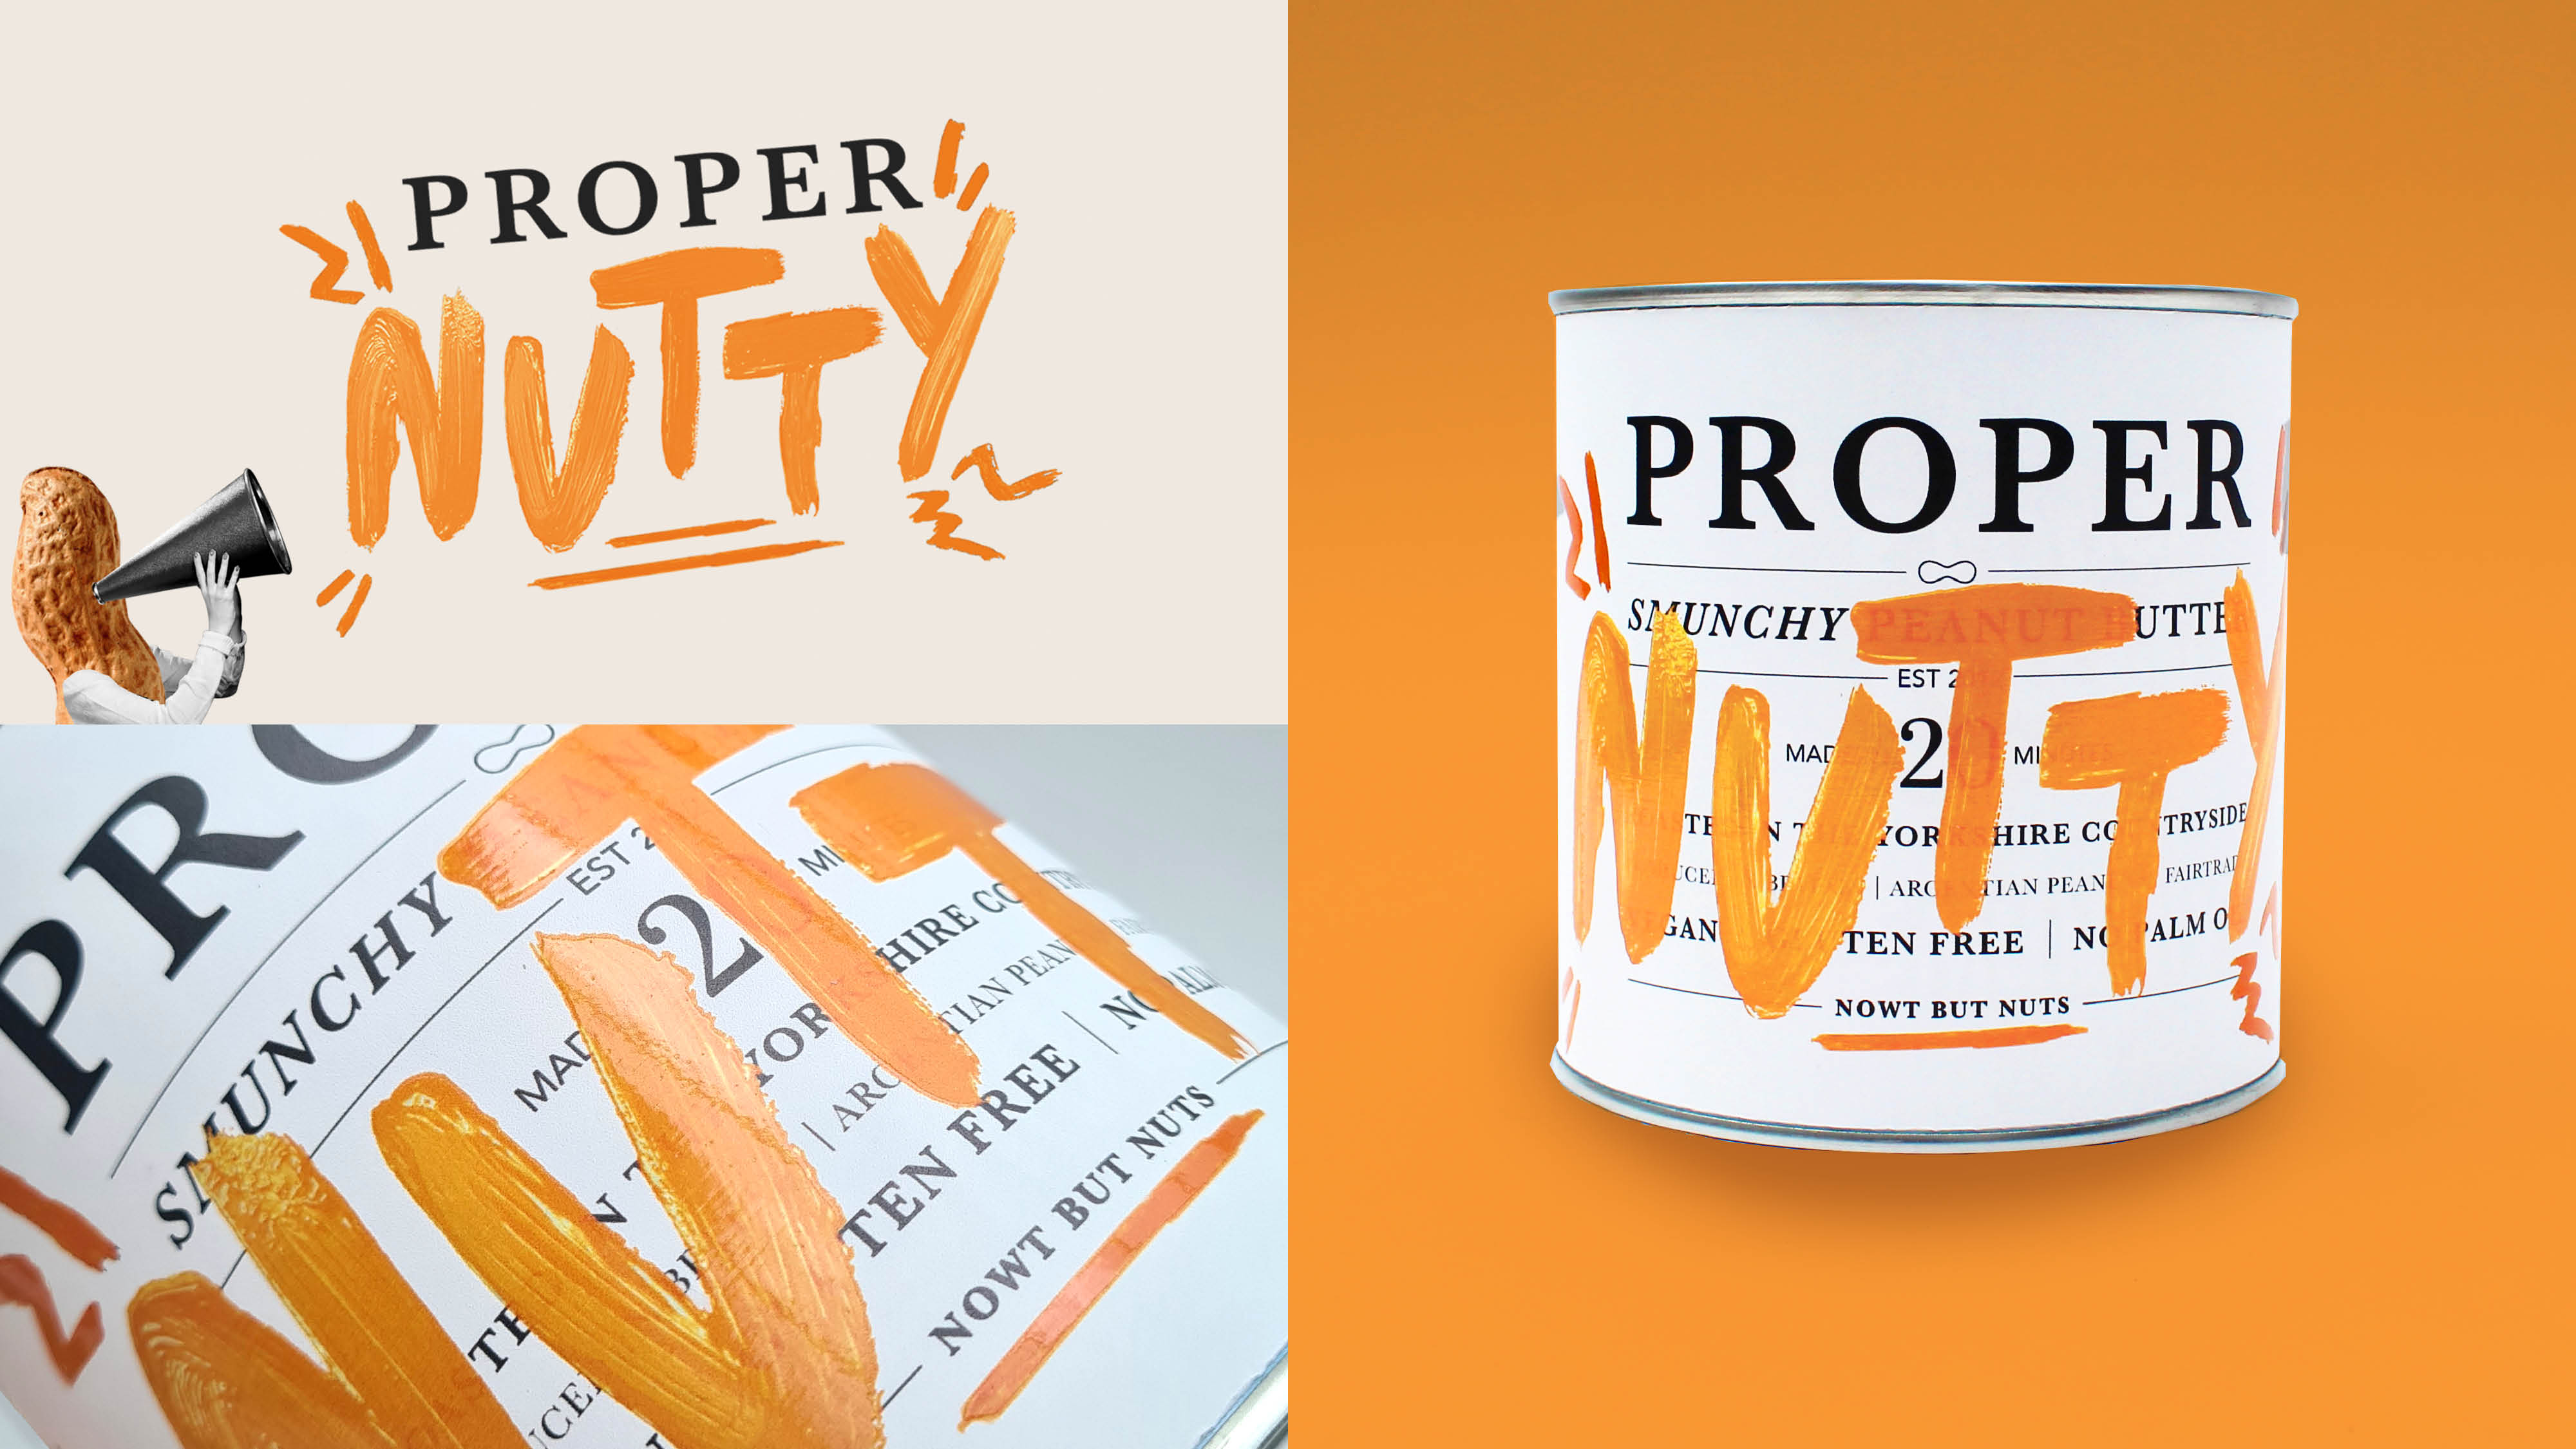 Proper Nutty peanut butter tin packaging, showcasing logo and spot varnish printing technique.